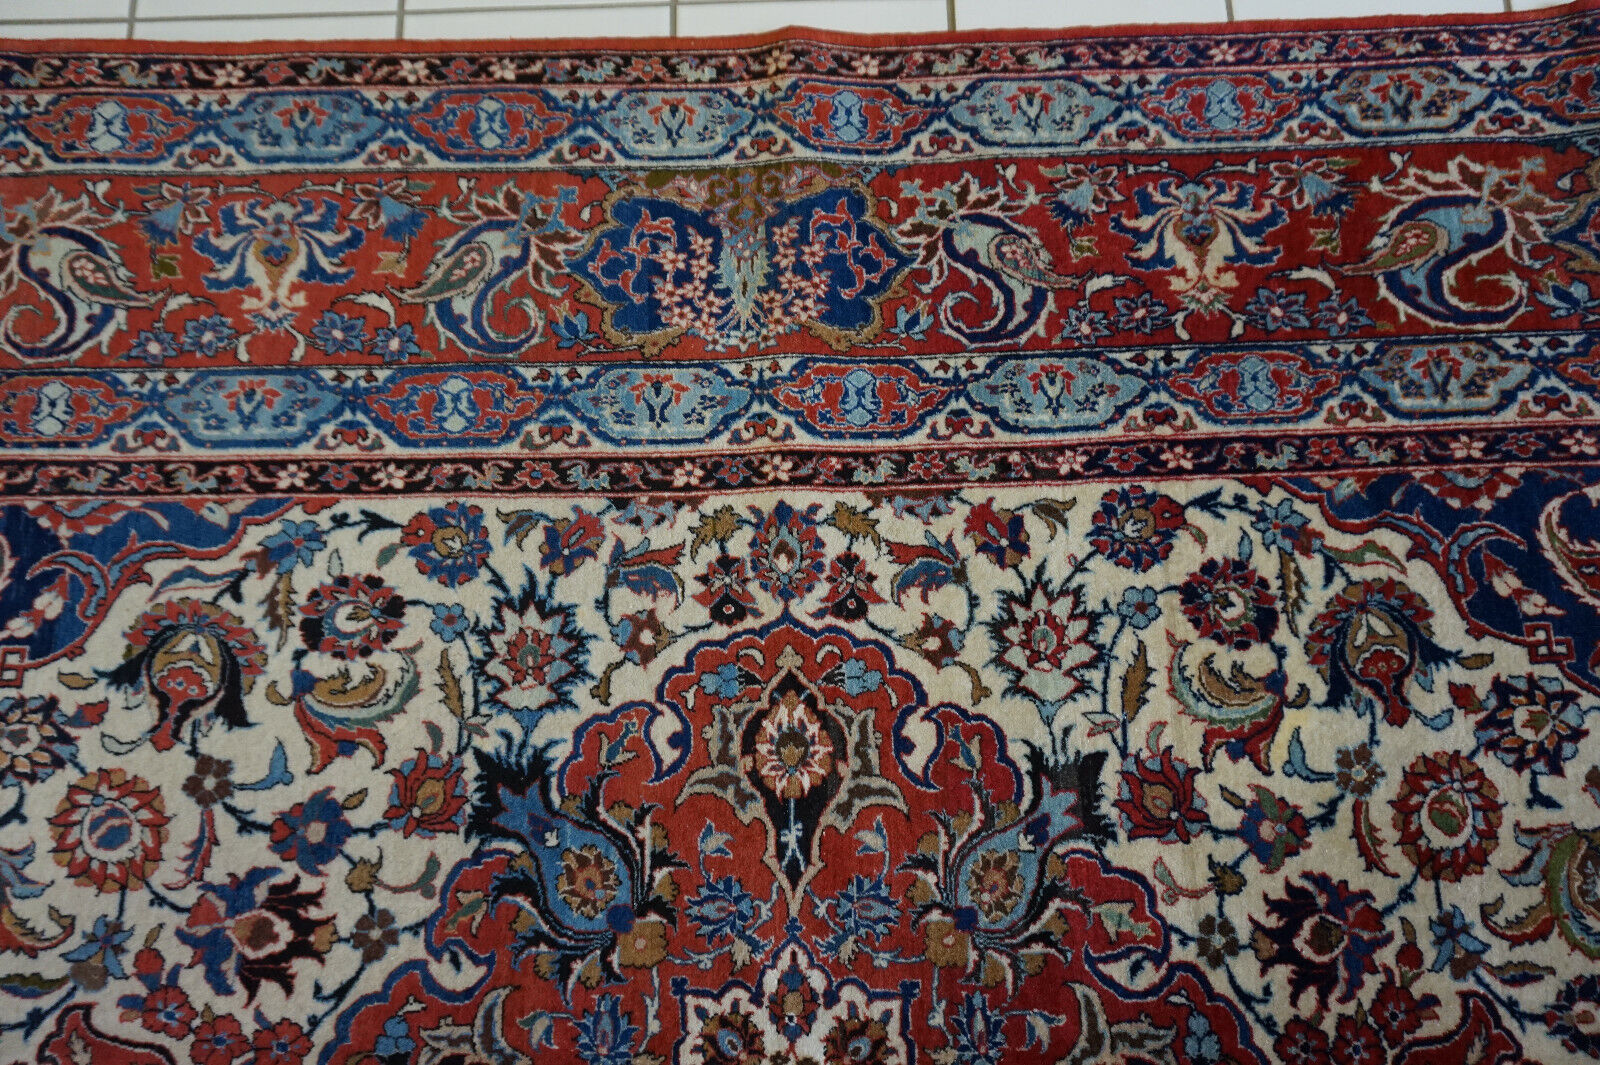 Overhead shot of the Handmade Antique Persian Style Isfahan Rug displaying size and dimensions